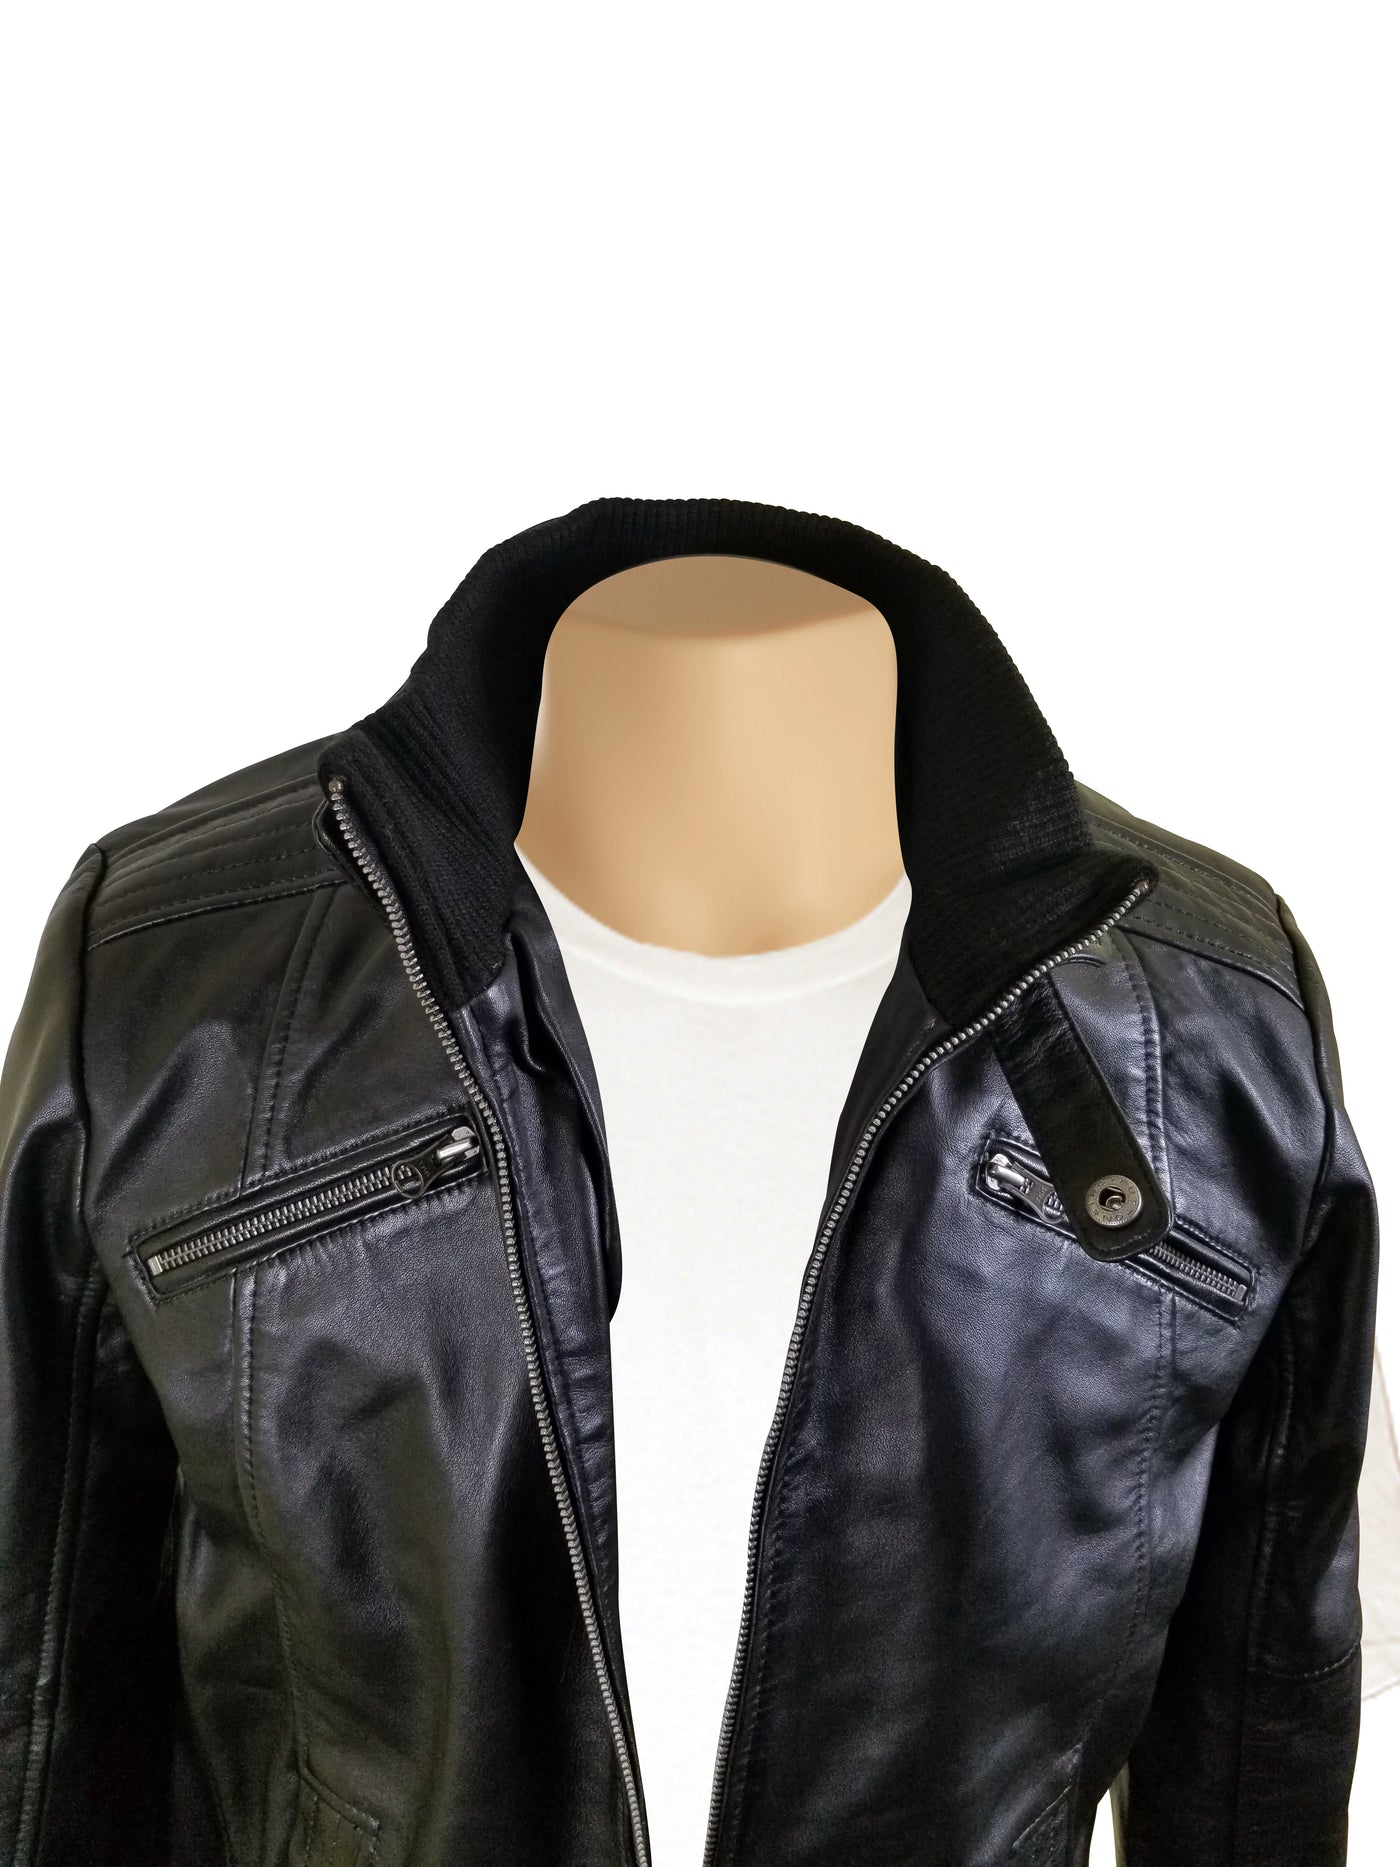 Ribbed Collar and Cuffs Greig's bomber jacket